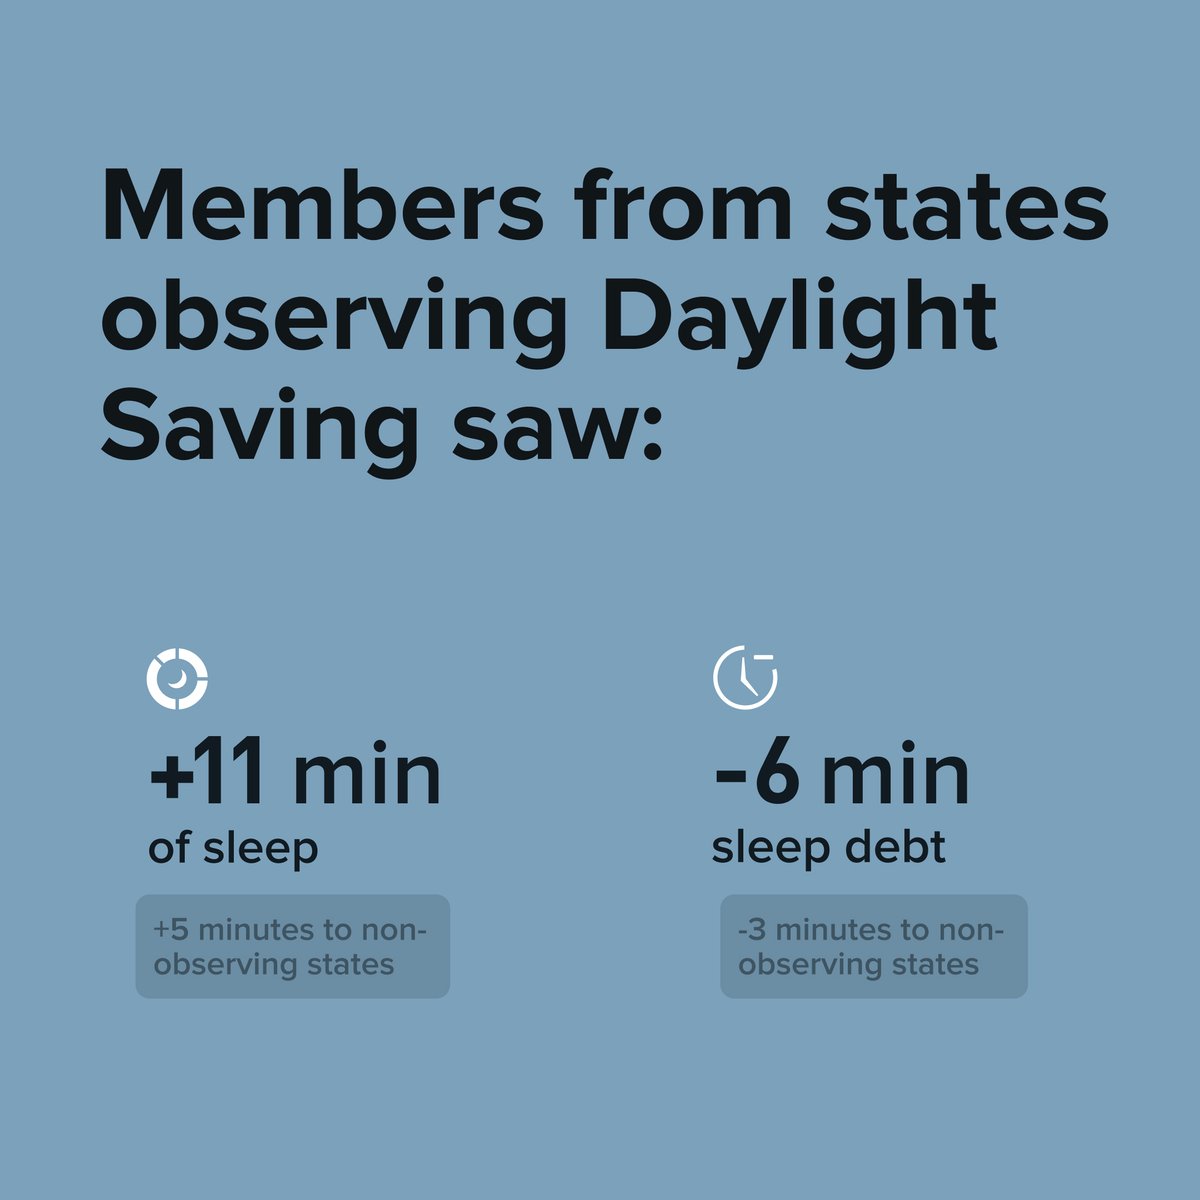 An extra hour of sleep for an hour less of daylight. 🤔 We looked at last year's data to see how the clock change affected members in states observing and not observing Daylight Saving. What do you think?